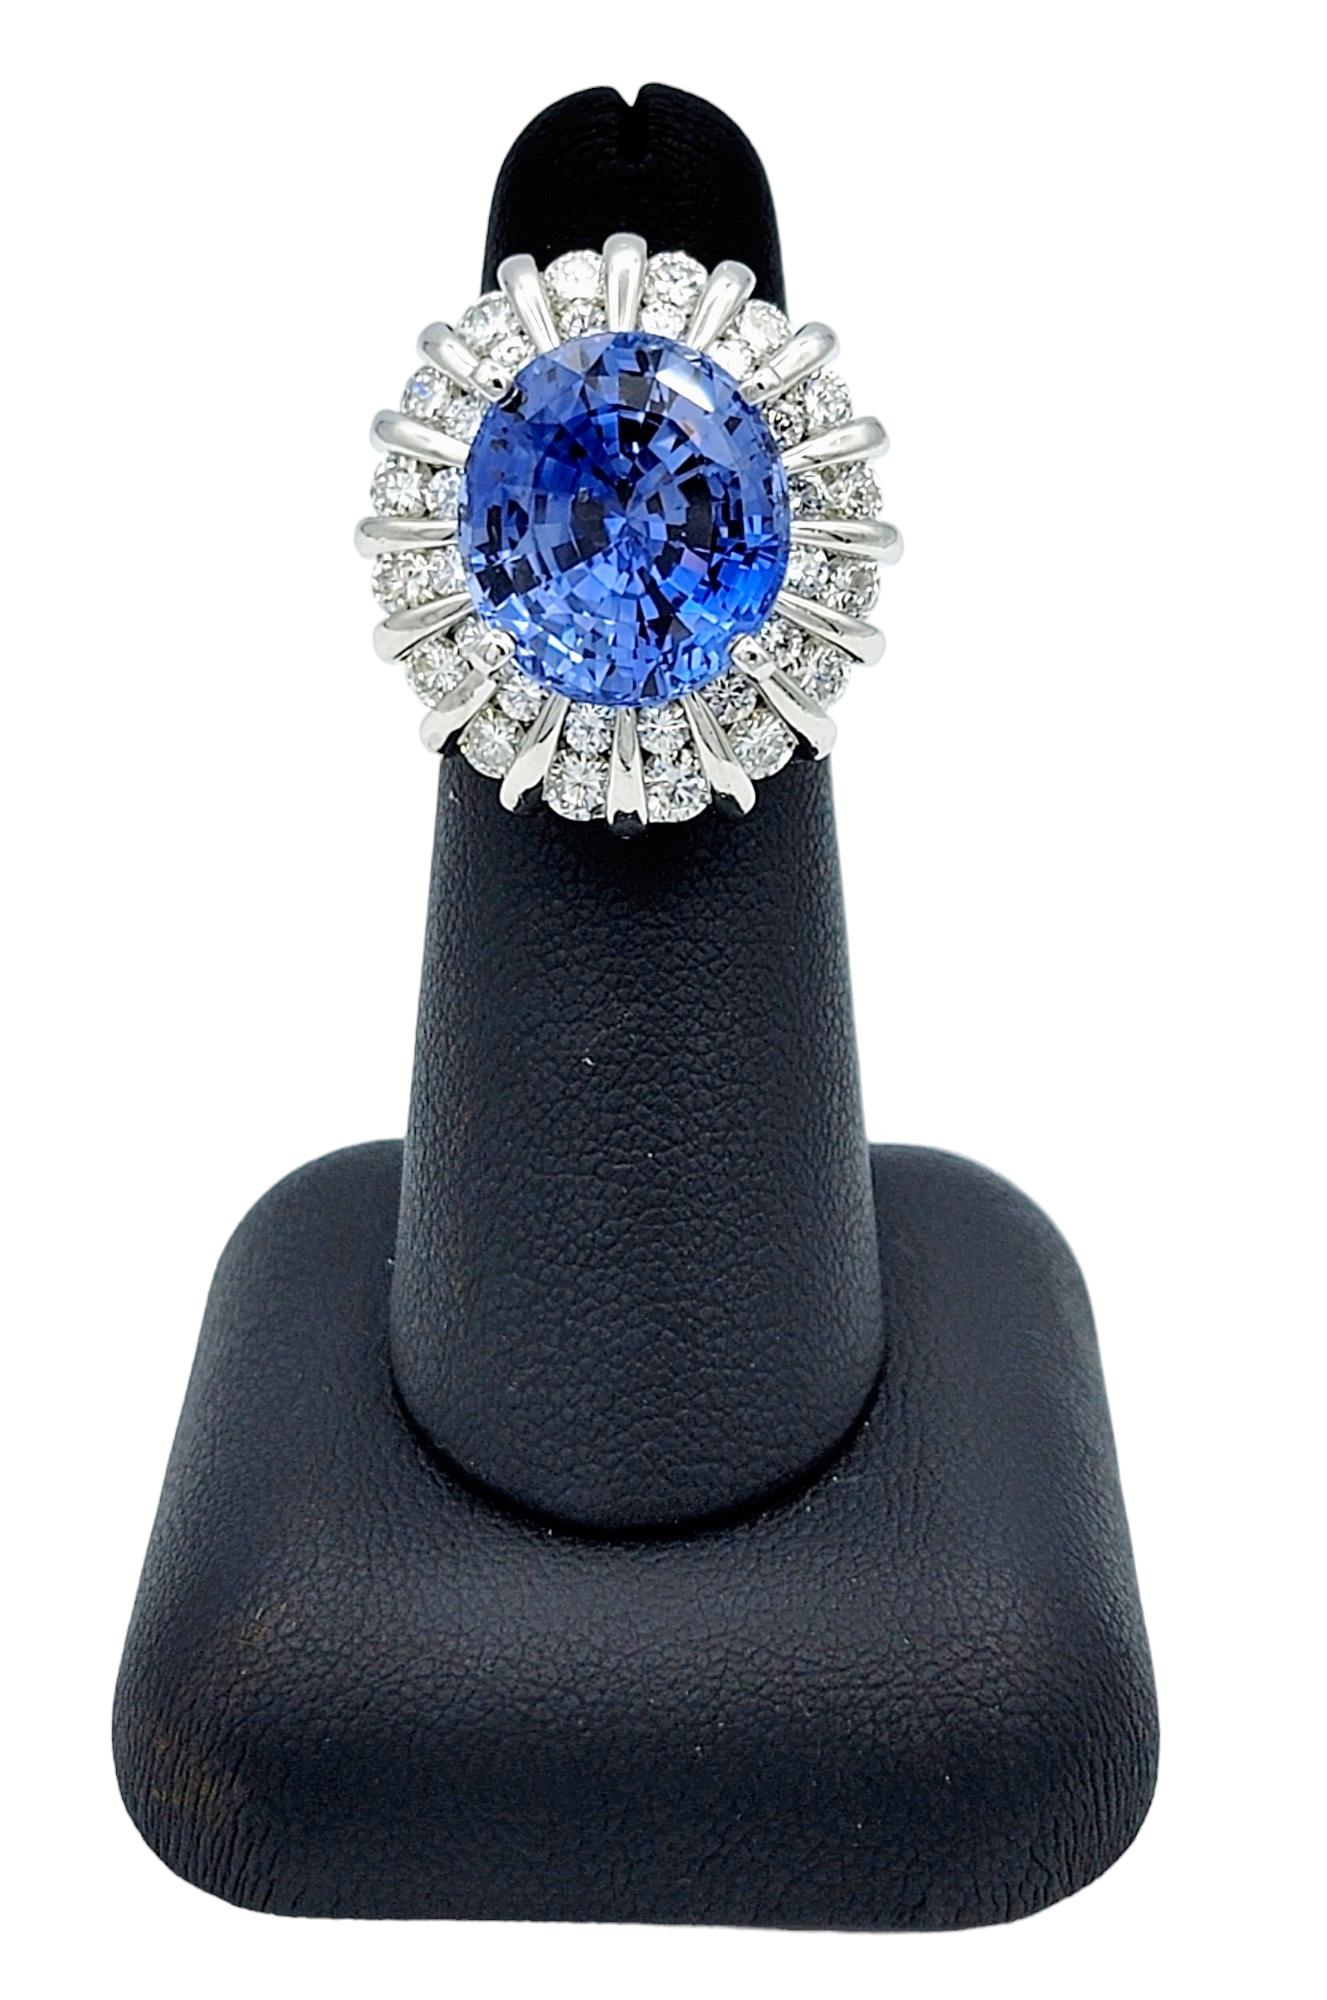 Rare Untreated 16.27 Carat Oval Cut Ceylon Sapphire and Double Diamond Halo Ring For Sale 4